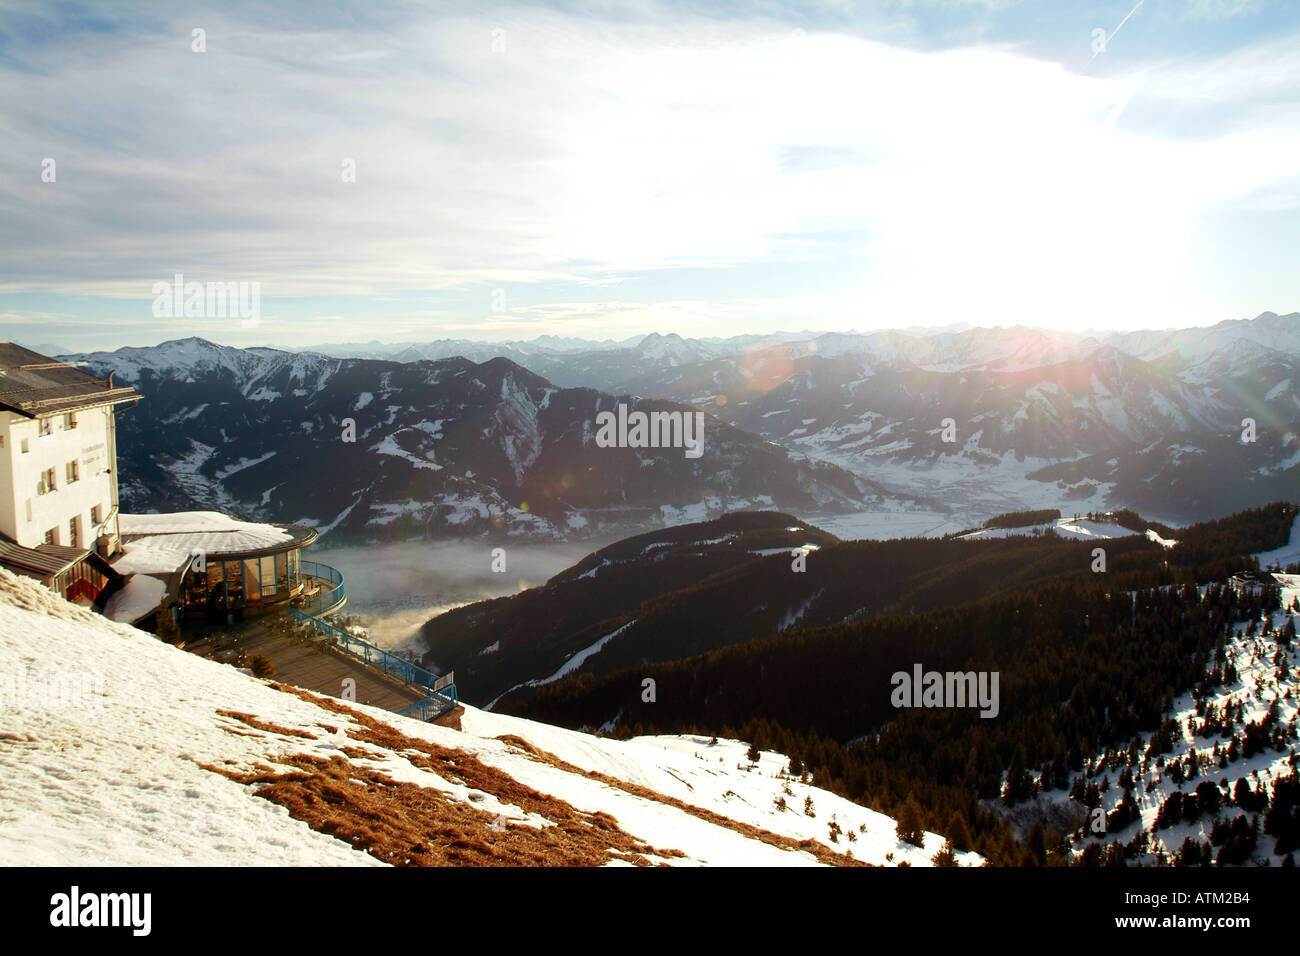 View down over the town and lake of Zell am See from the summit of the Schmittenhohe mountain  Stock Photo